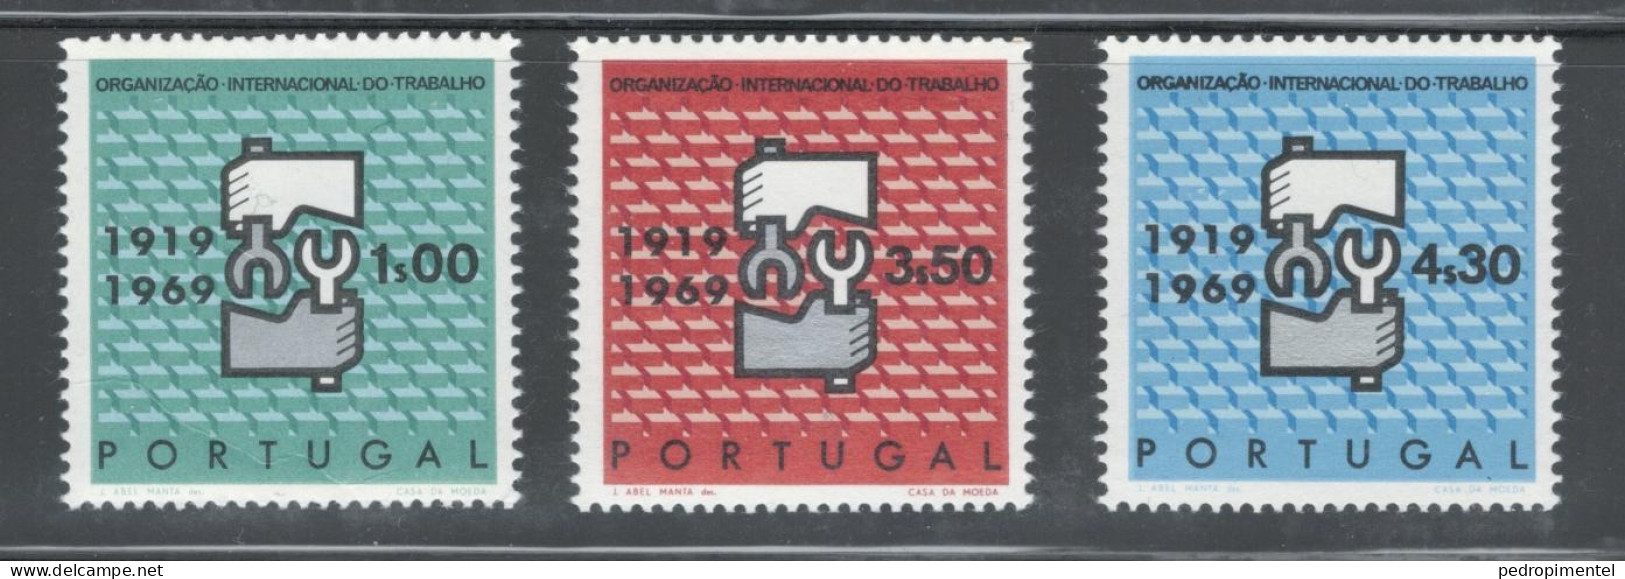 Portugal Stamps 1969 "OIT" Condition MNH #1047-1049 - Neufs